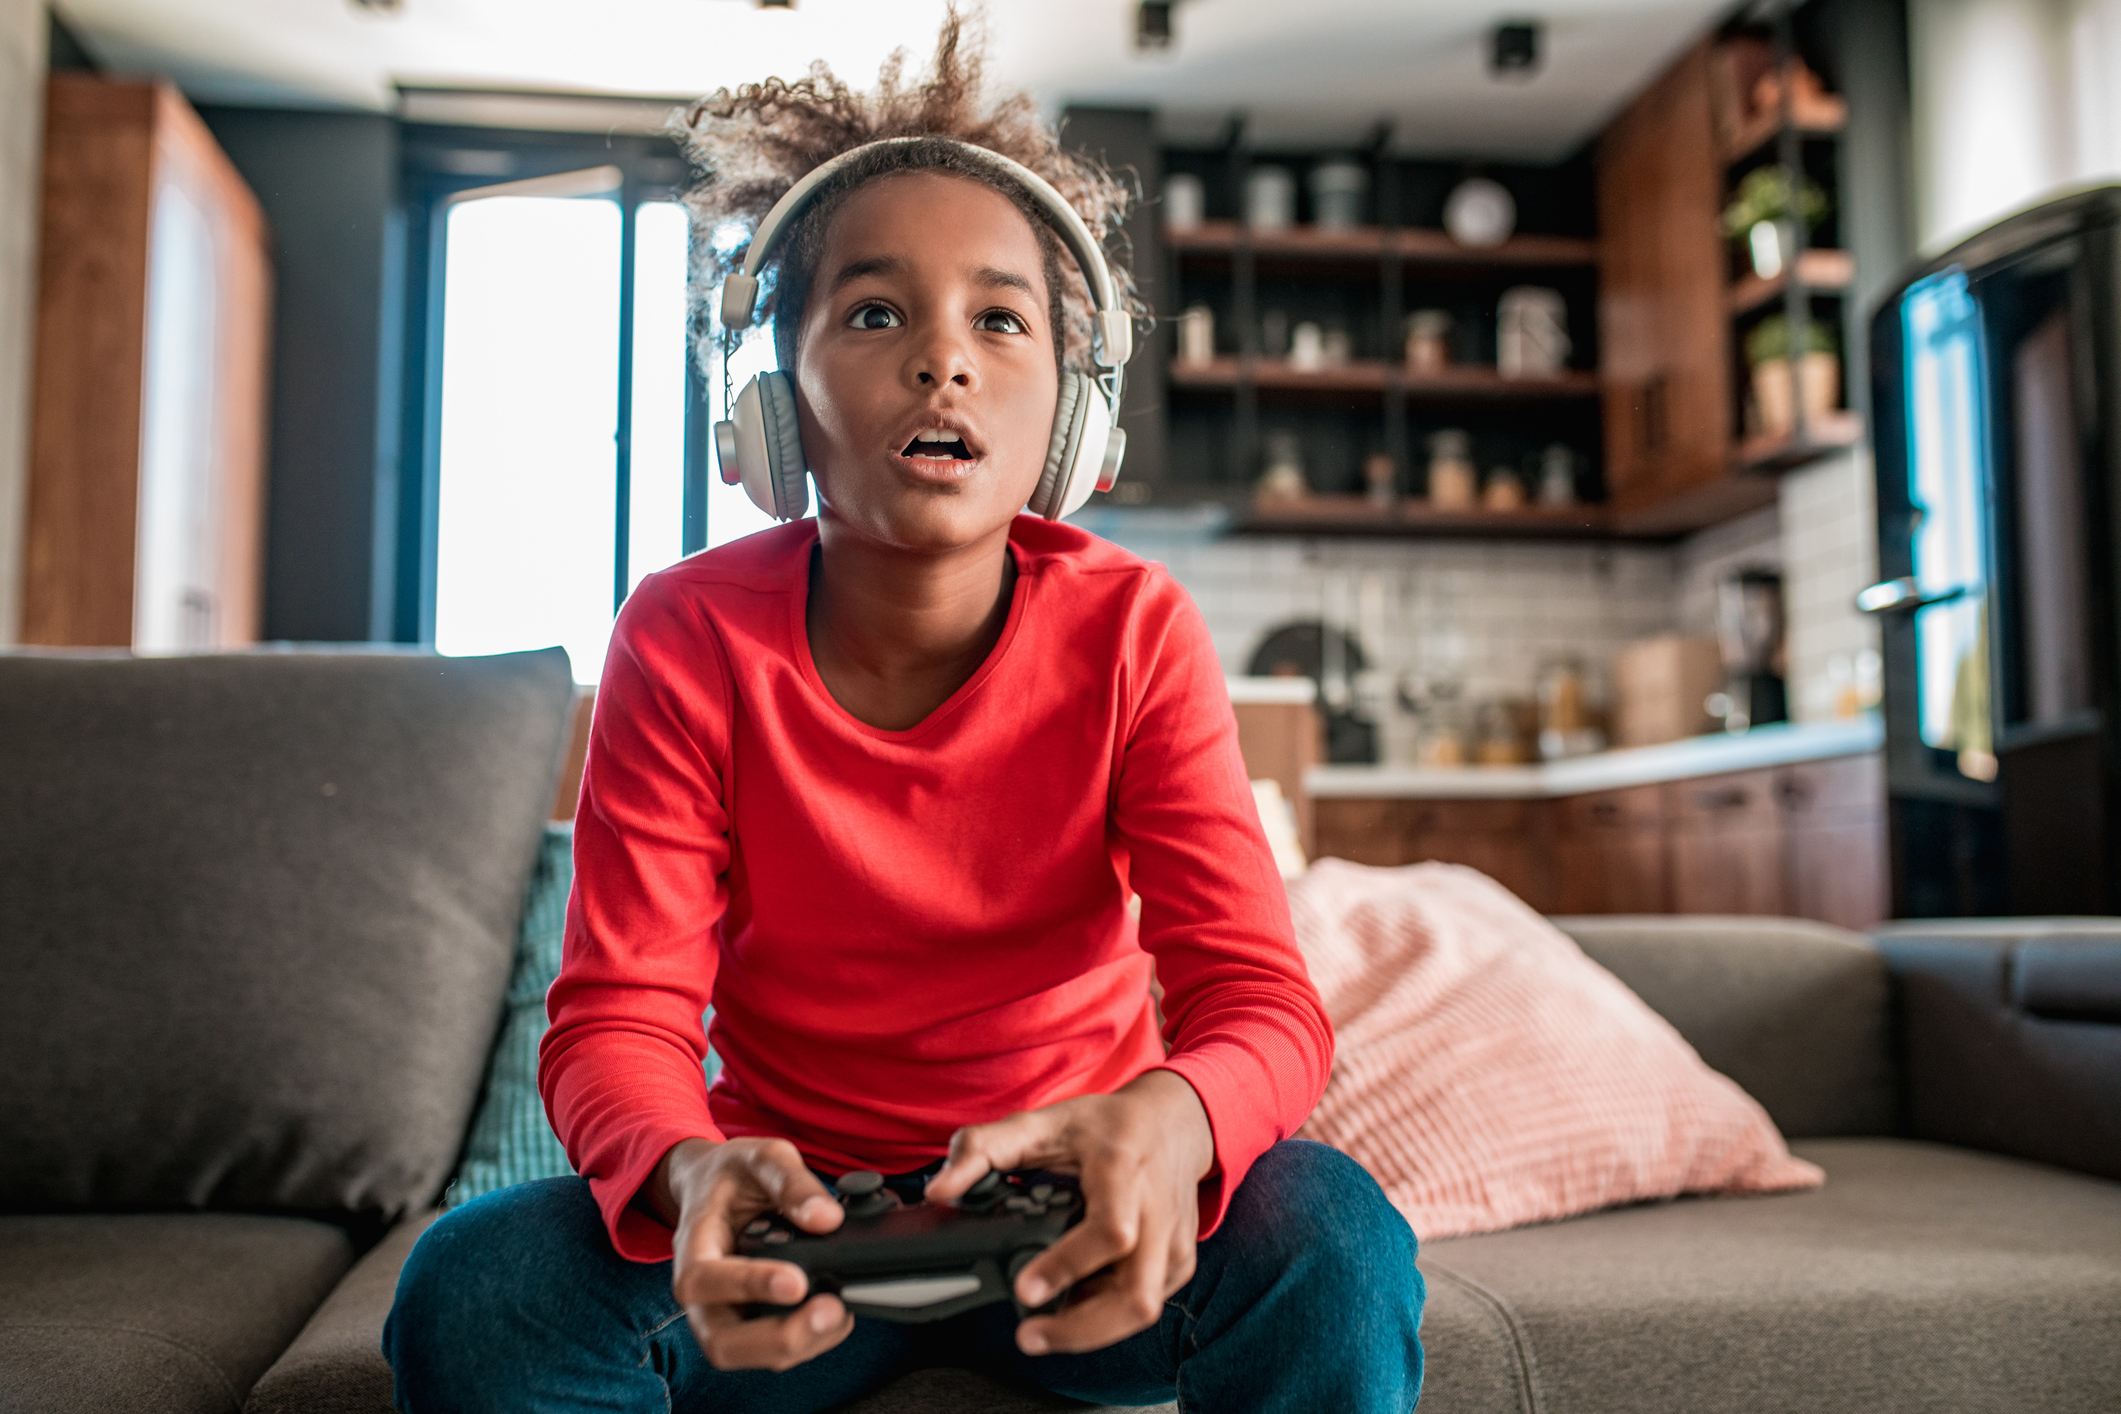 Just 1 hour of gaming may improve attention